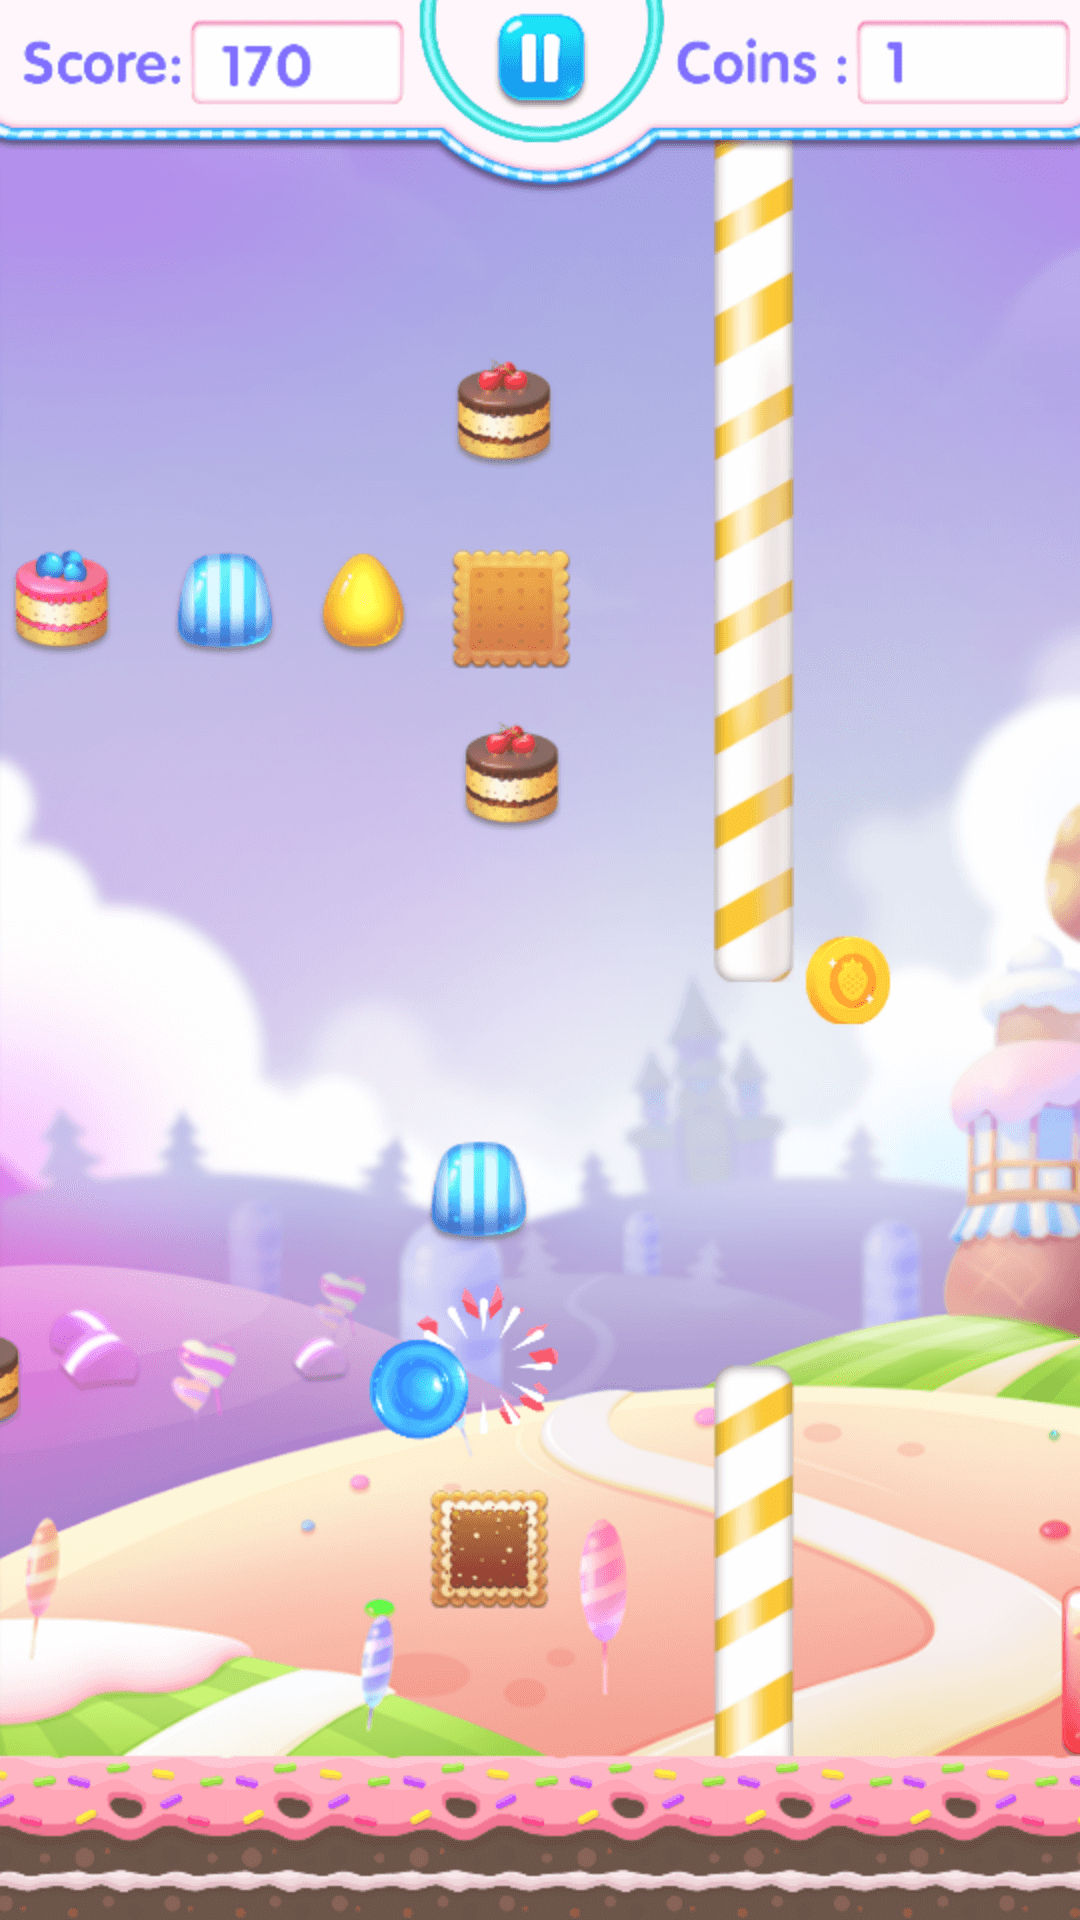 Candy Jump game for iOS  android